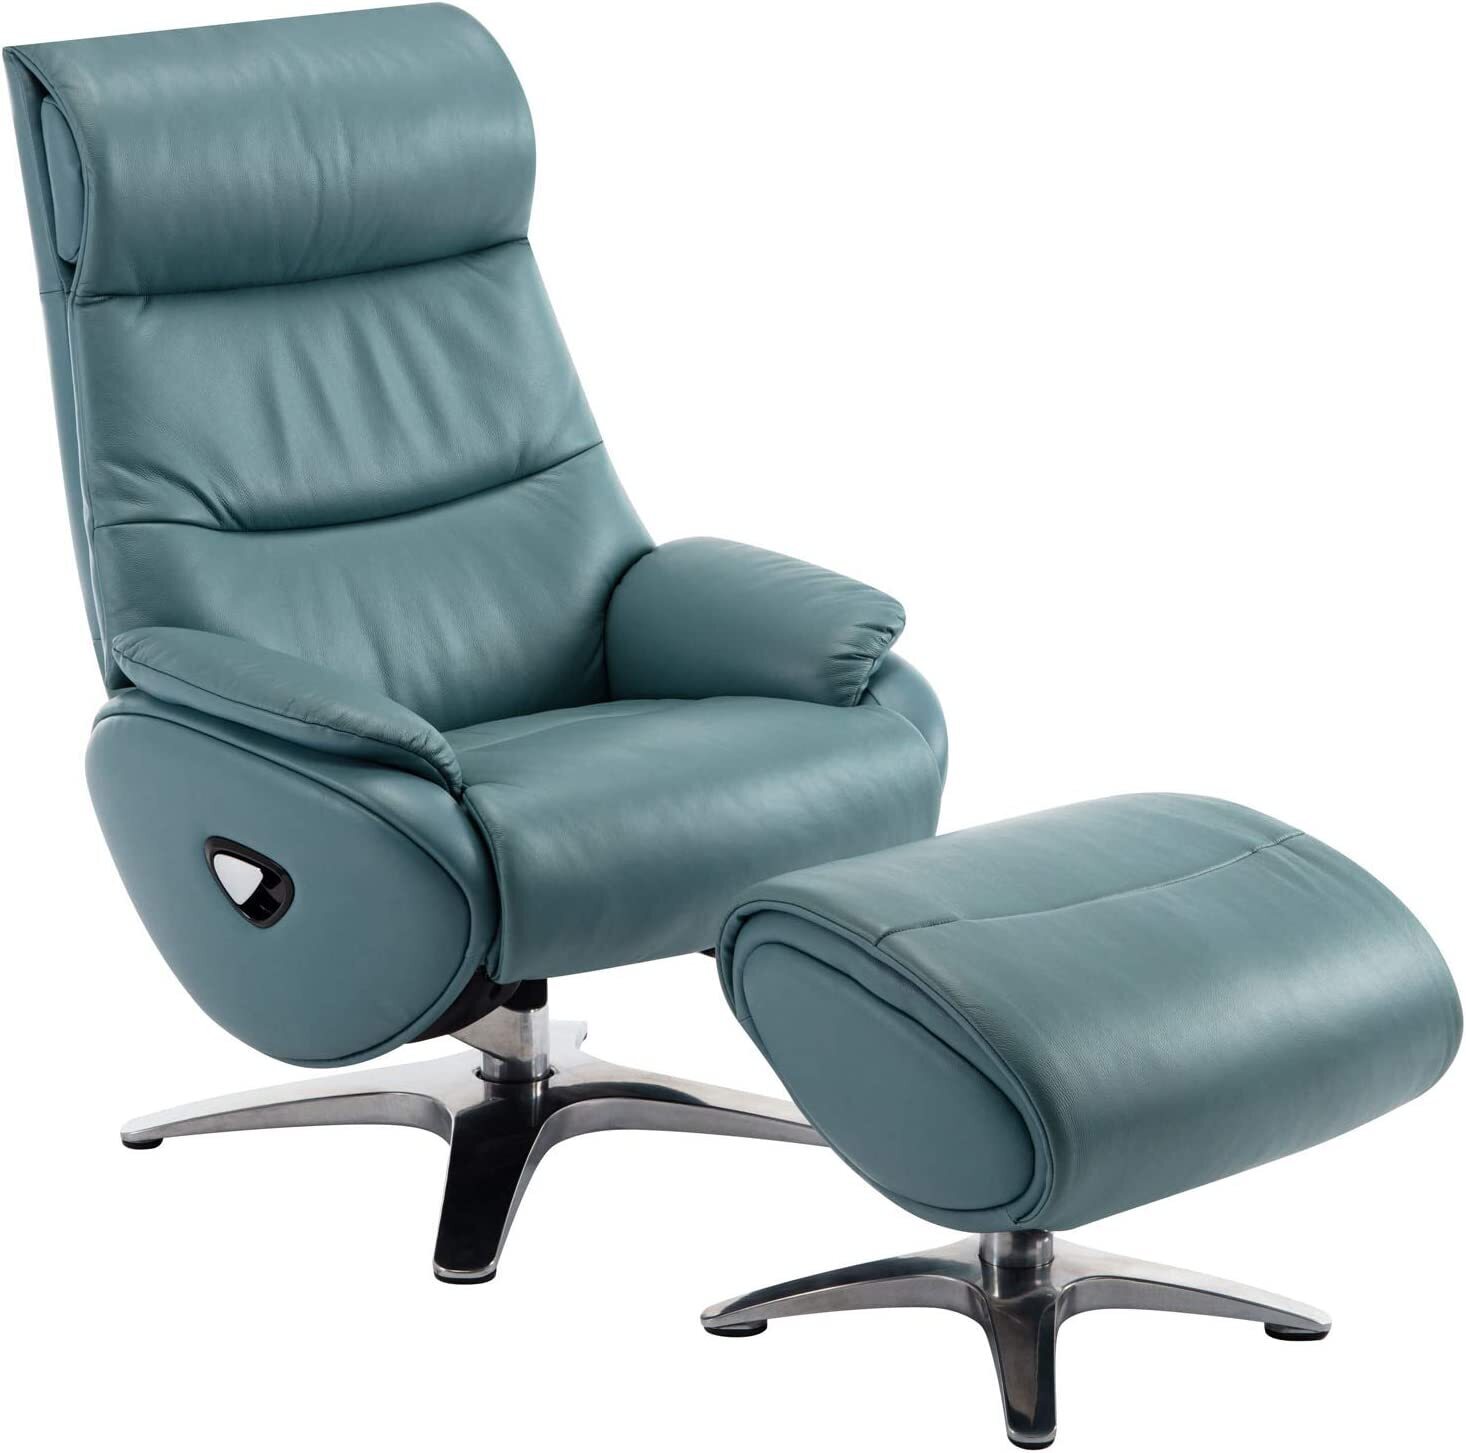 Barcalounger Leather Recliner and Ottoman with Adjustable Headrest